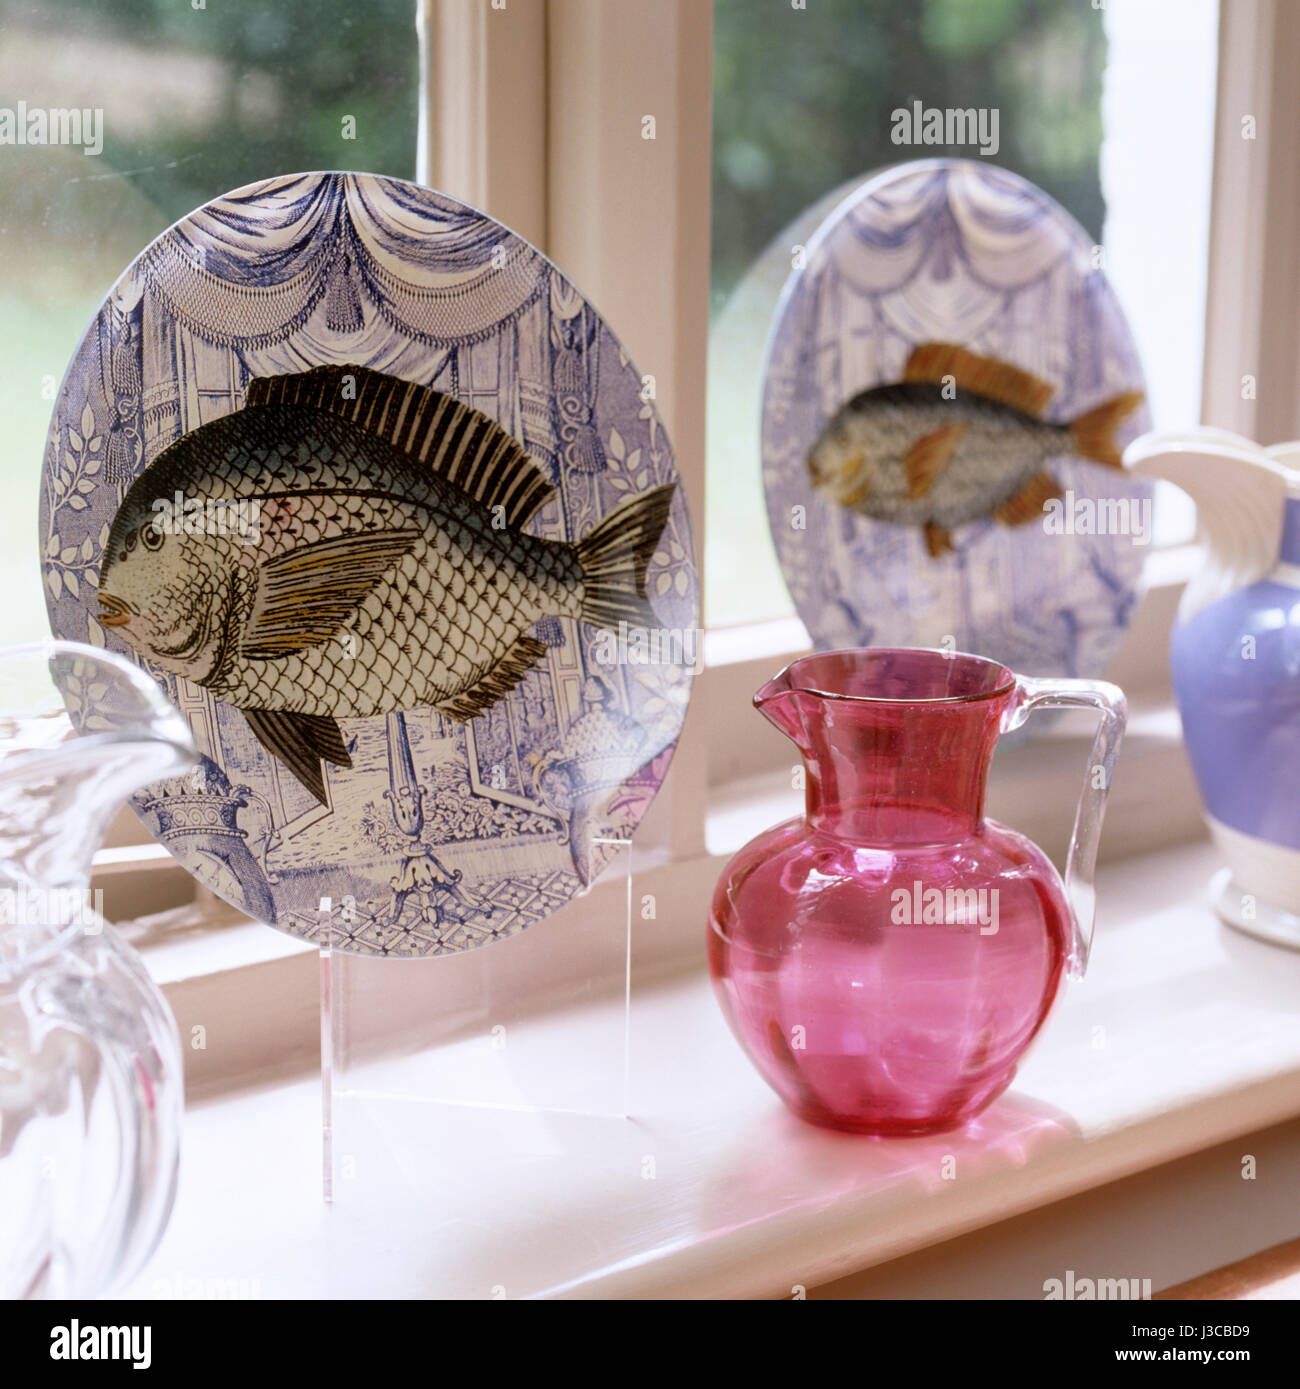 Ornamental plates with fish illustrations on window sill with pink glass jug Stock Photo